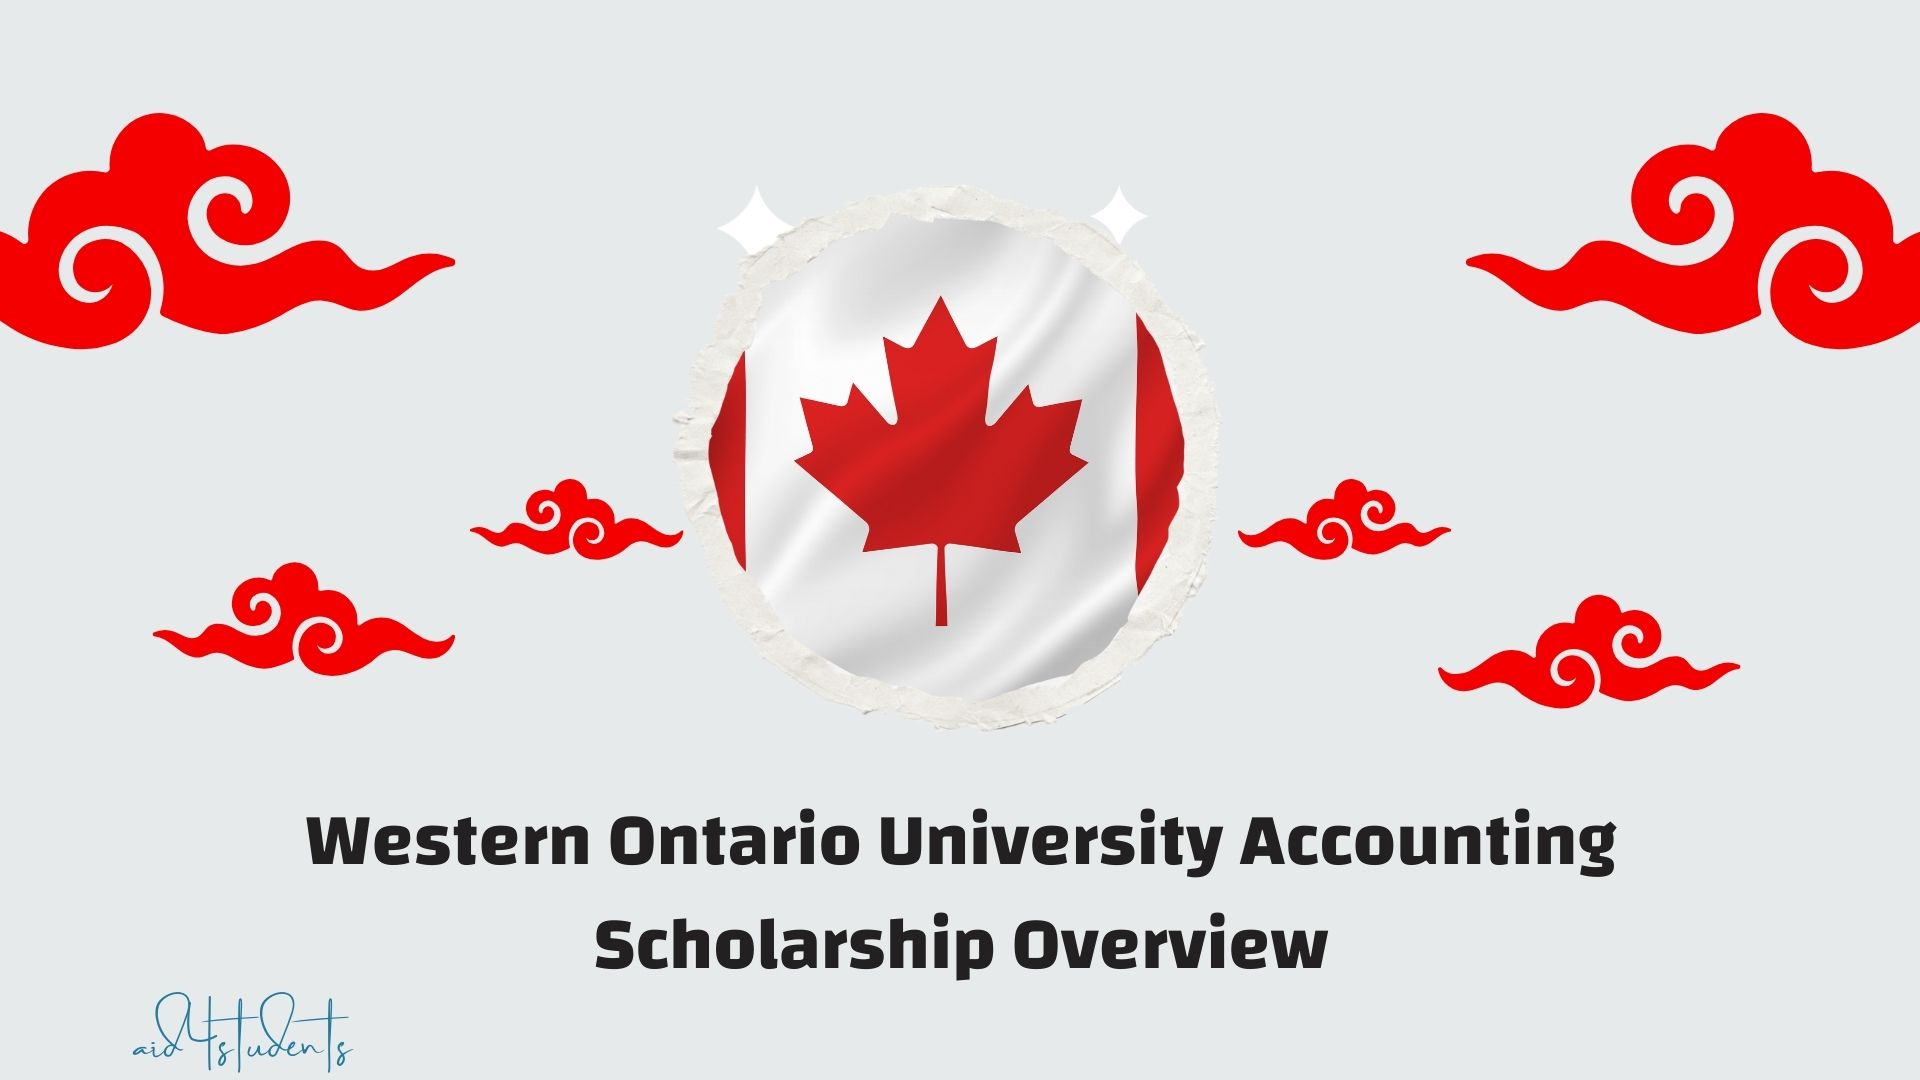 Western Ontario University Accounting Scholarship Overview